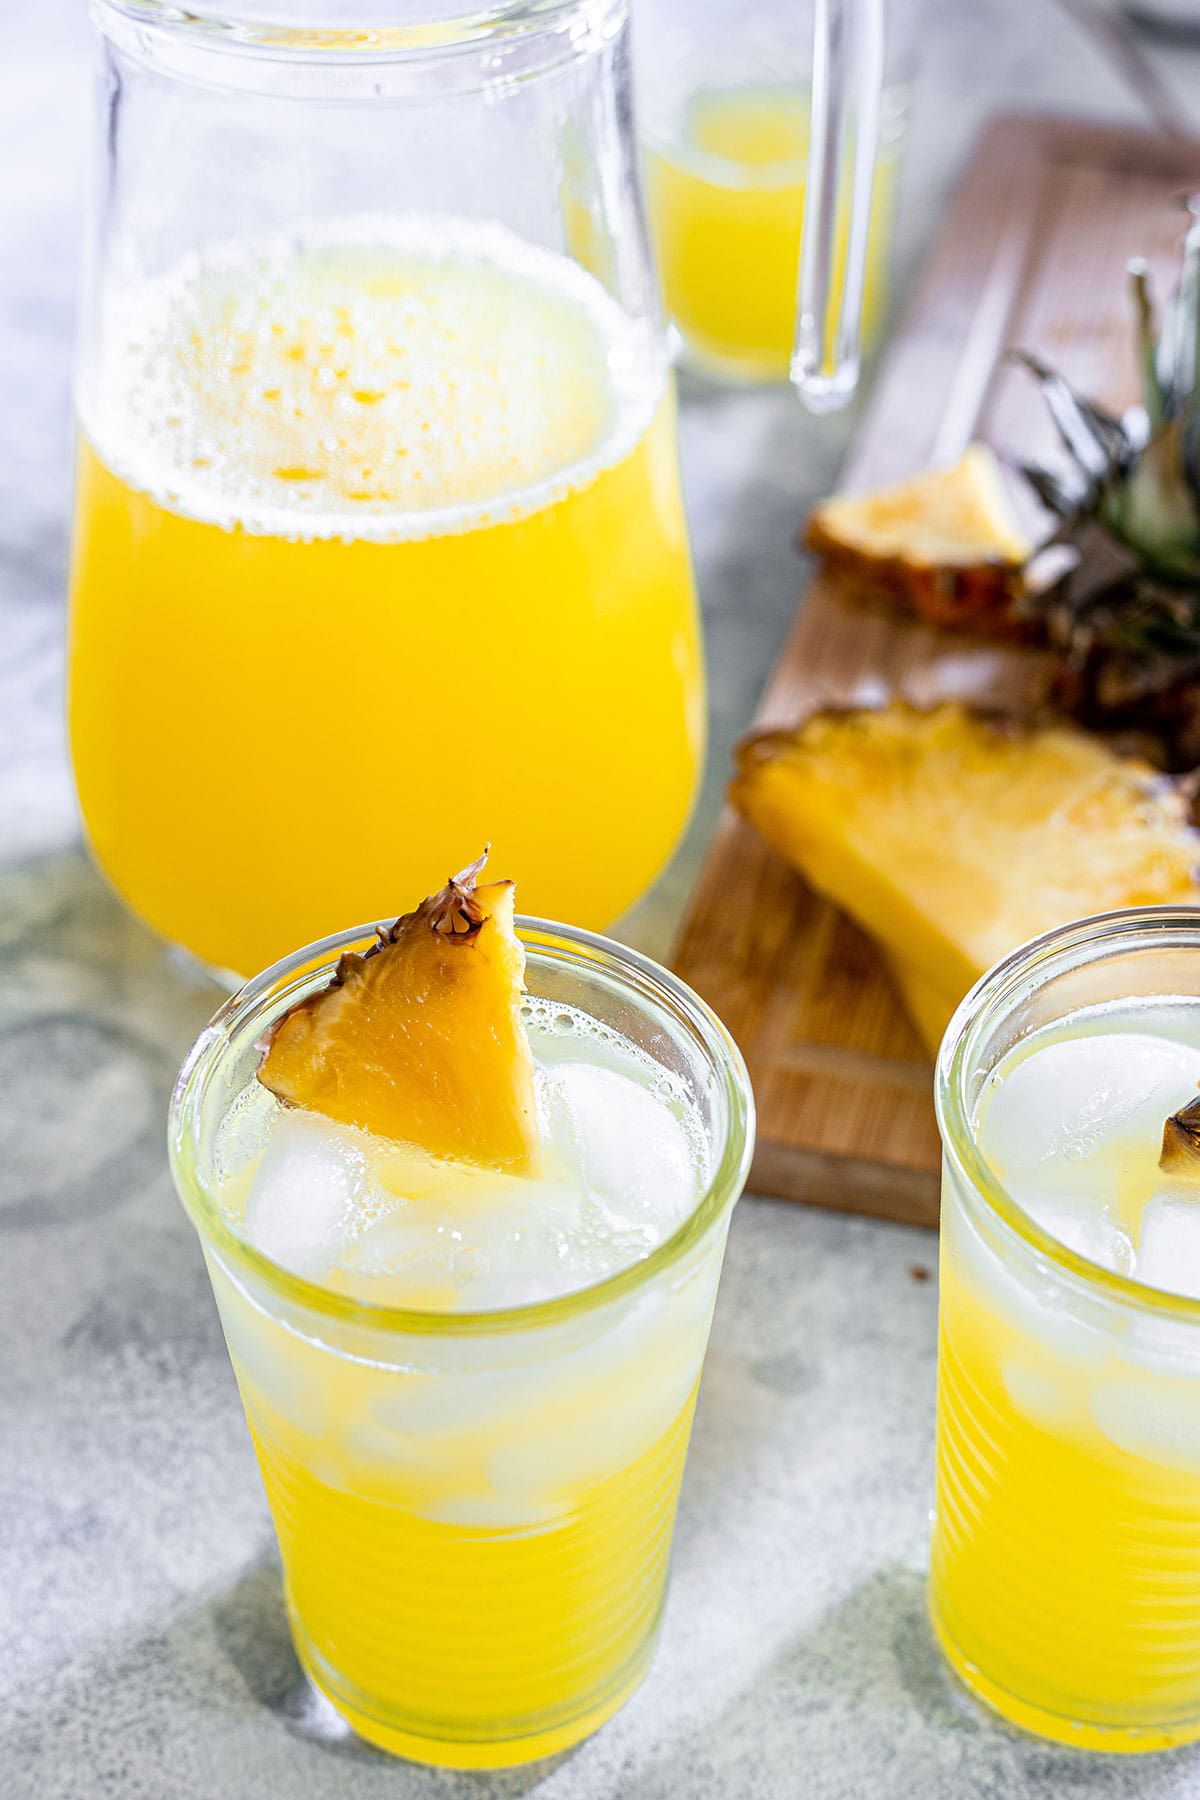 Pineapple agua fresca, also known as agua de piña in glasses and a pitcher in the background.